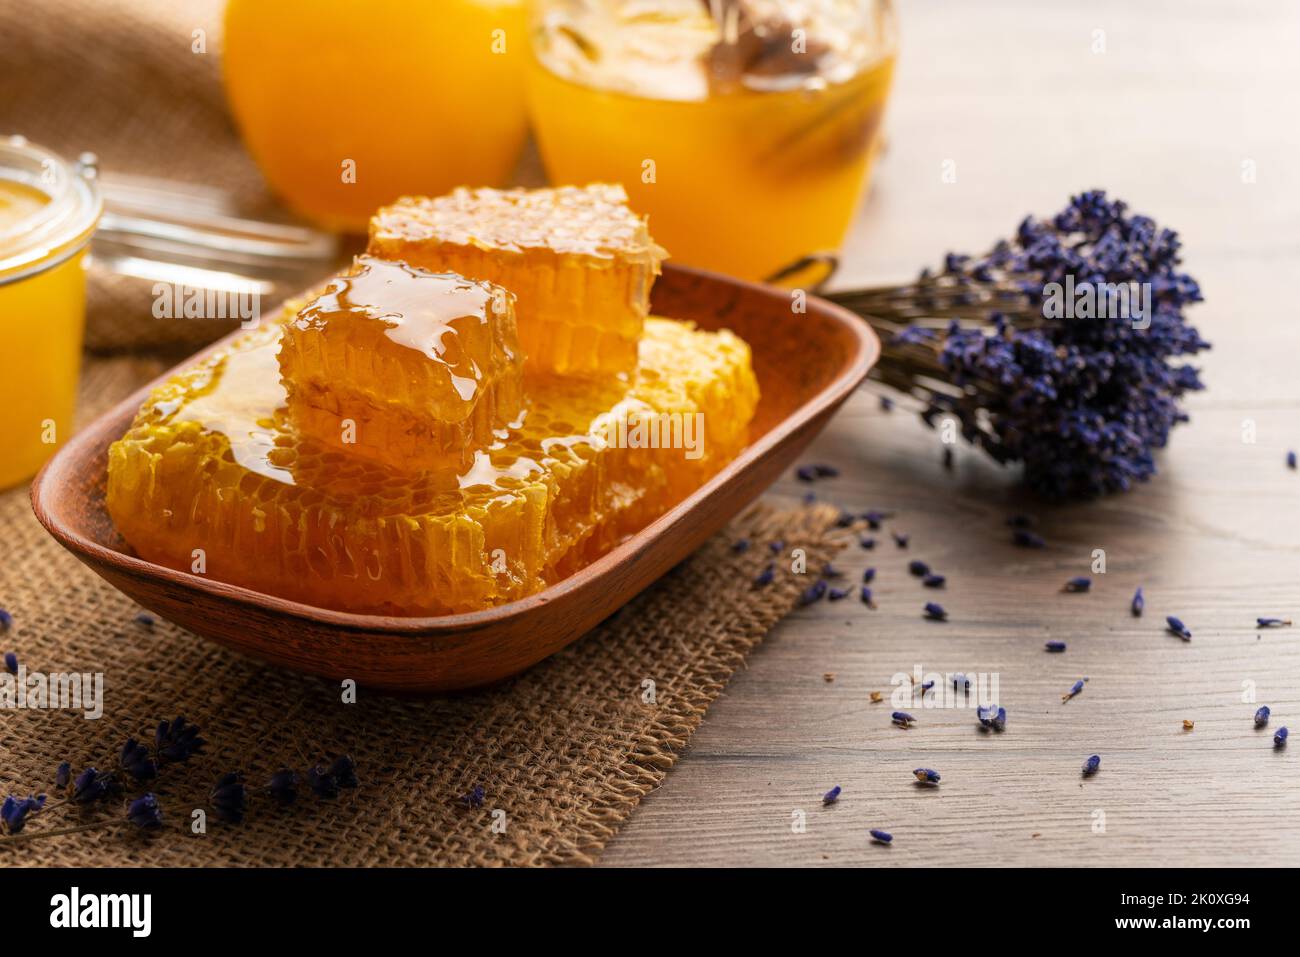 Honeycomb in clay dish on kitchen table sweet background Stock Photo